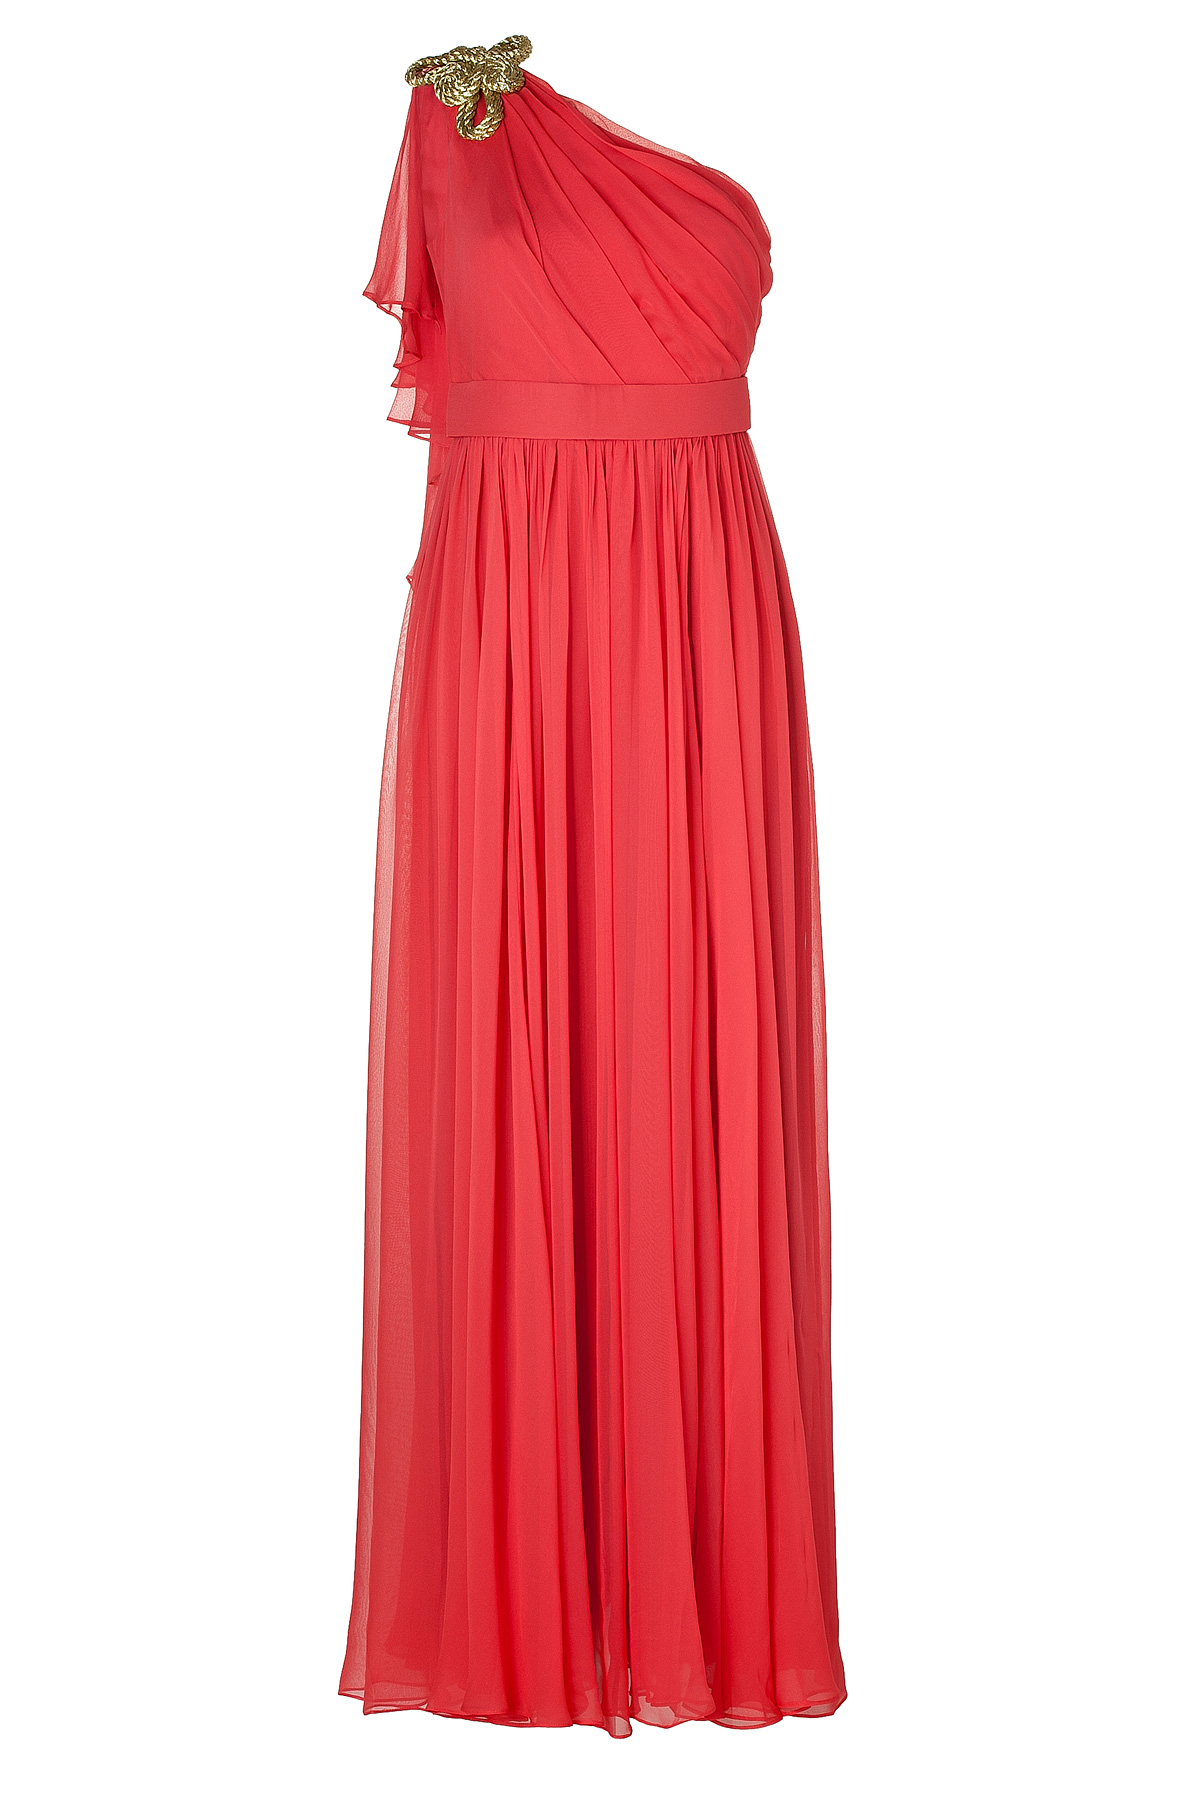 Notte By Marchesa Melon Rope Embellished One Shoulder Silk Chiffon Gown ...